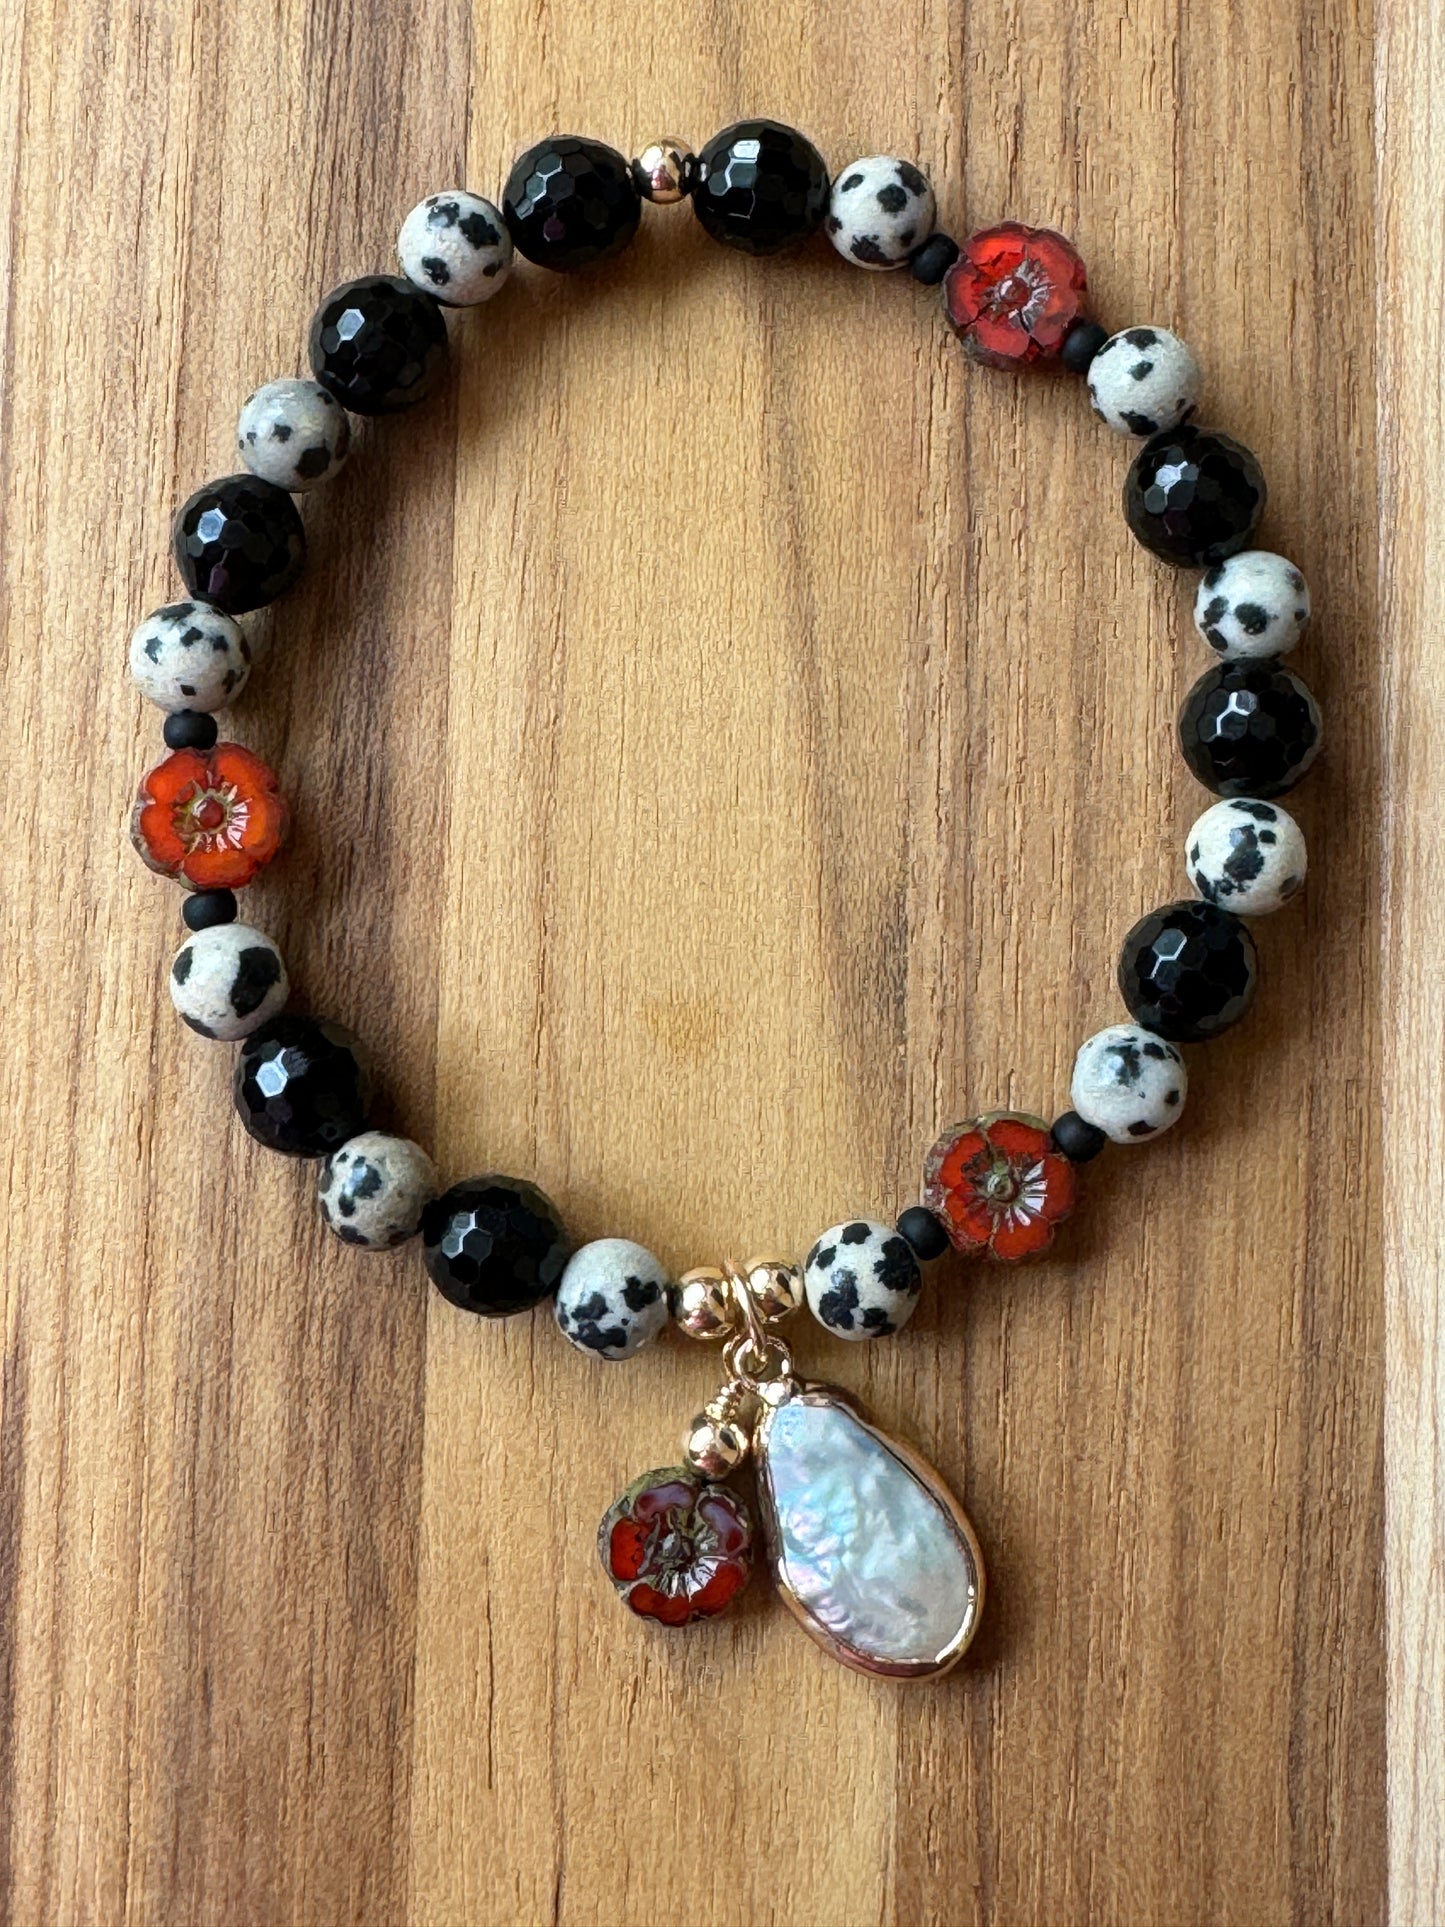 Dalmatian Jasper and Black Onyx Stretch Beaded Bracelet with Baroque Pearl and Red Flower Dangles